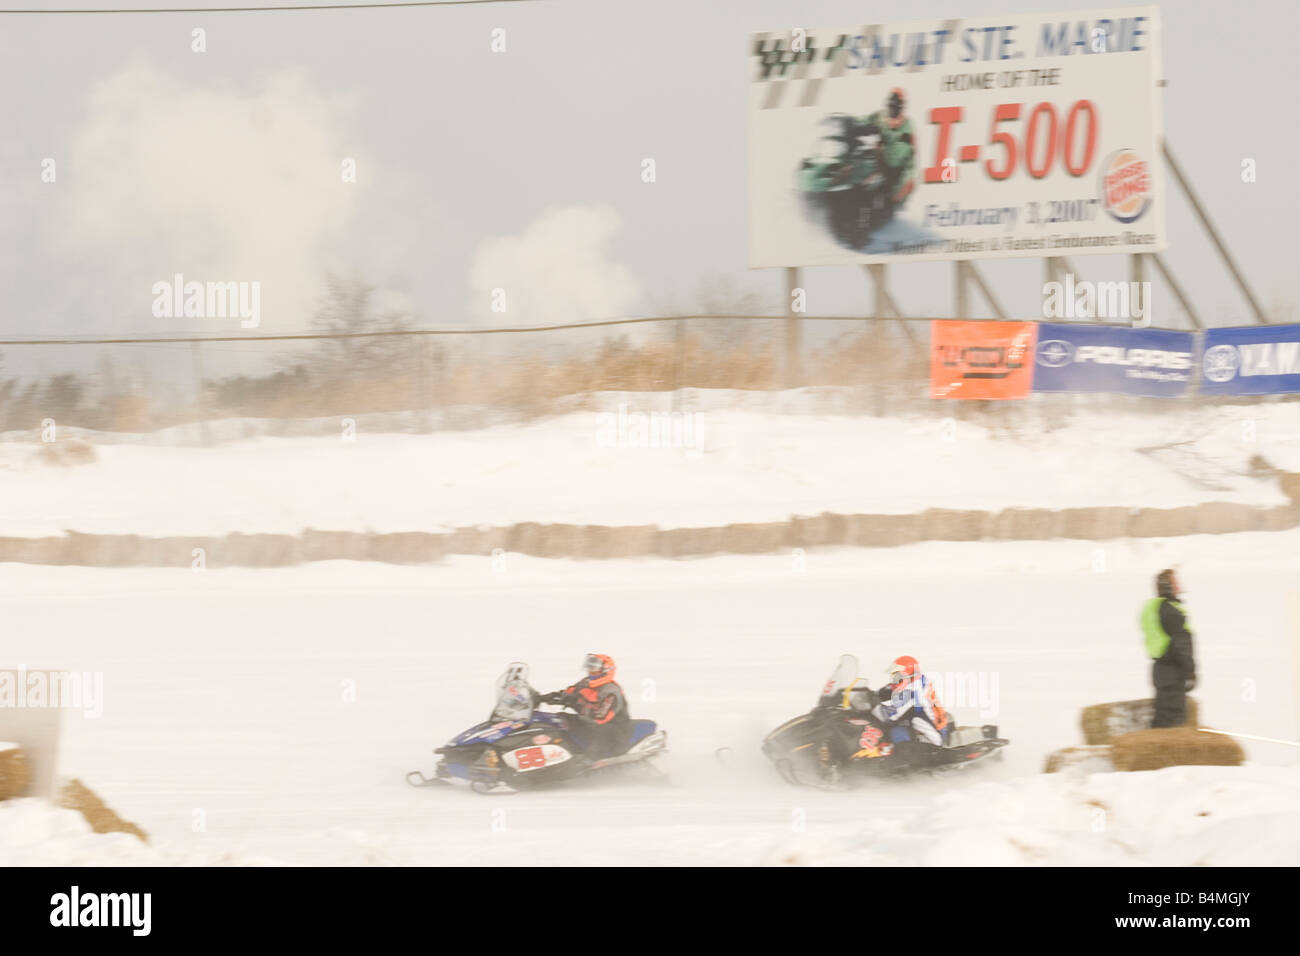 Snowmobile racing action at the I 500 Snowmobile race in Sault Ste Marie Michigan Stock Photo